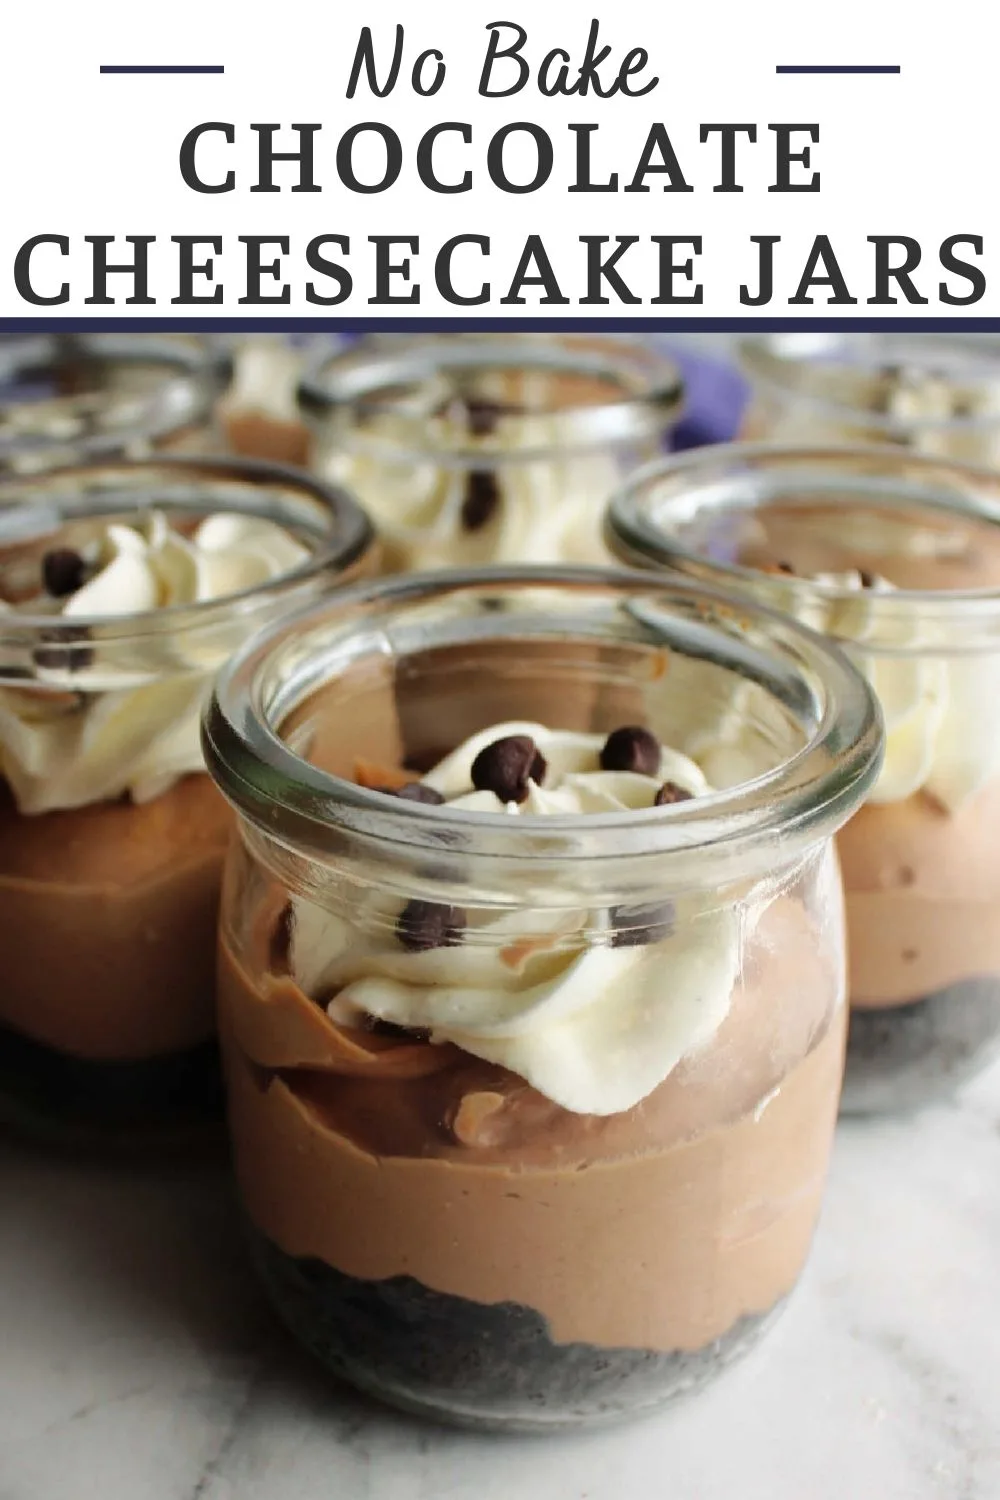 Smooth creamy no bake chocolate cheesecake jars are perfect single serve desserts for parties and picnics. They are easy to make and don't heat up the kitchen.